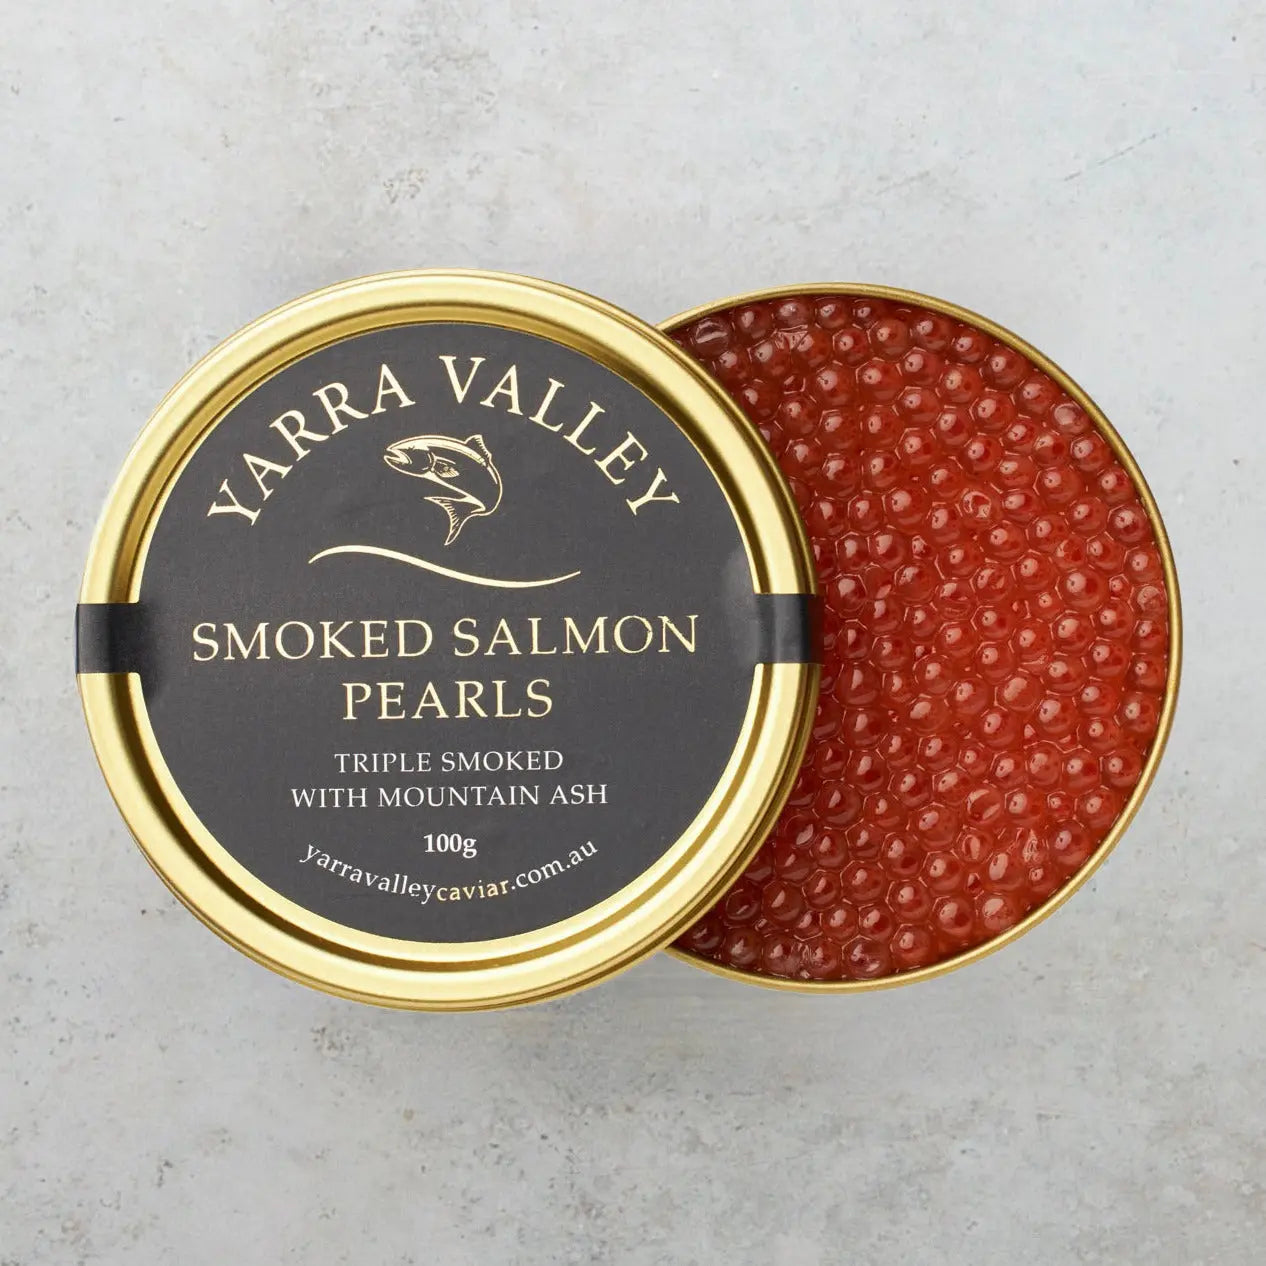 YARRA VALLEY SMOKED SALMON ROE 100g 